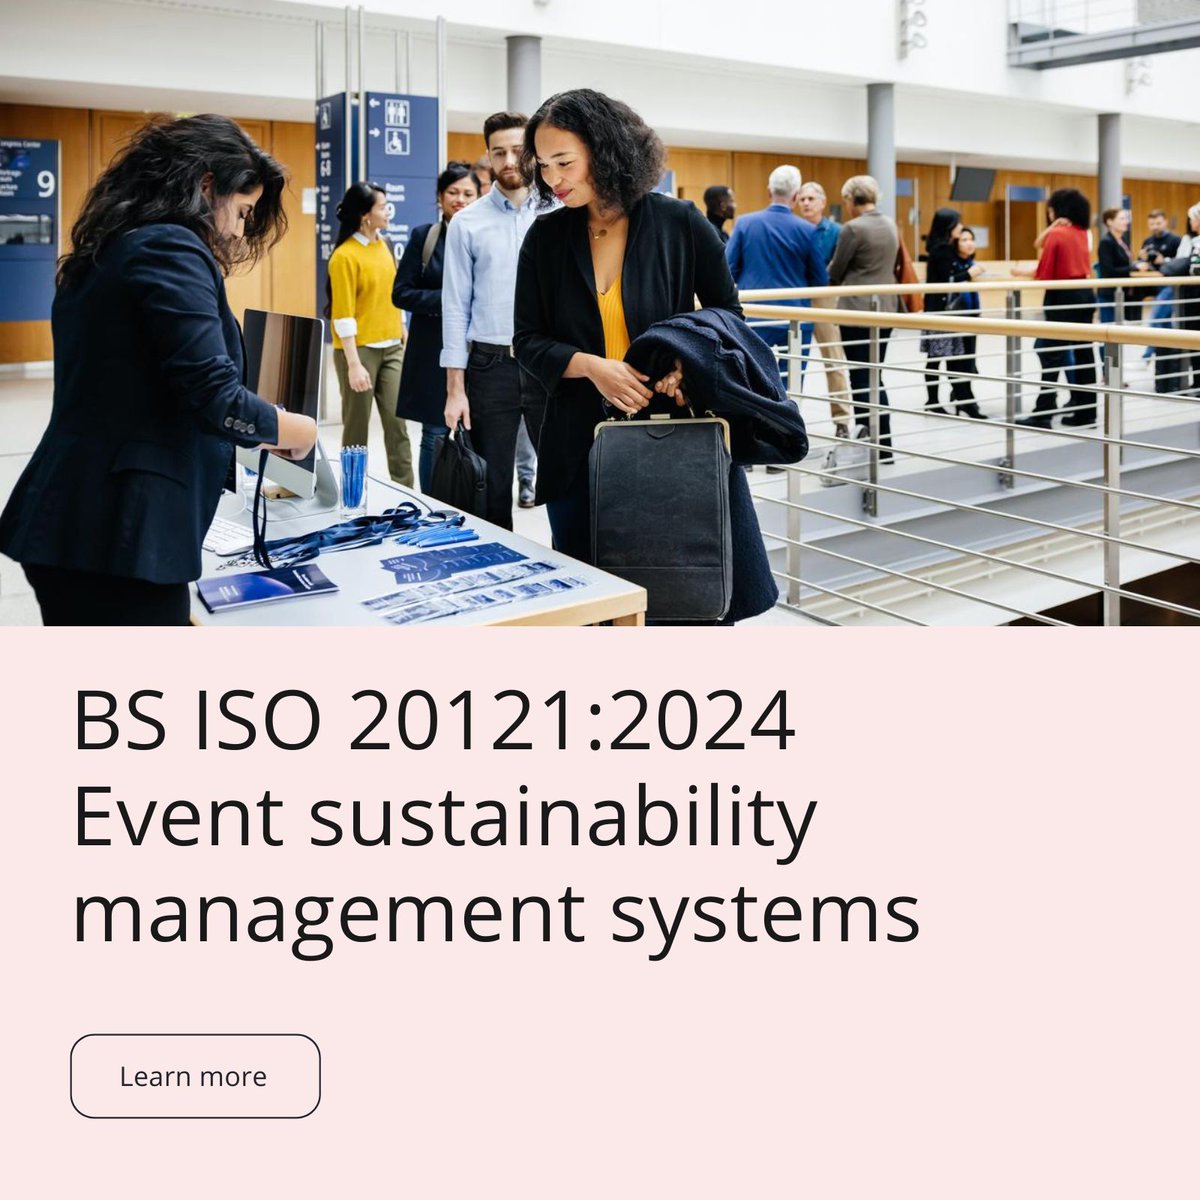 For sustainability in events management you need BS ISO 20121:2024. This revised international standard drives you to create a working culture that considers sustainability at every decision point. Learn more: bit.ly/49n0wPl #BSISO20121 #SustainableEvents #BSIStandards